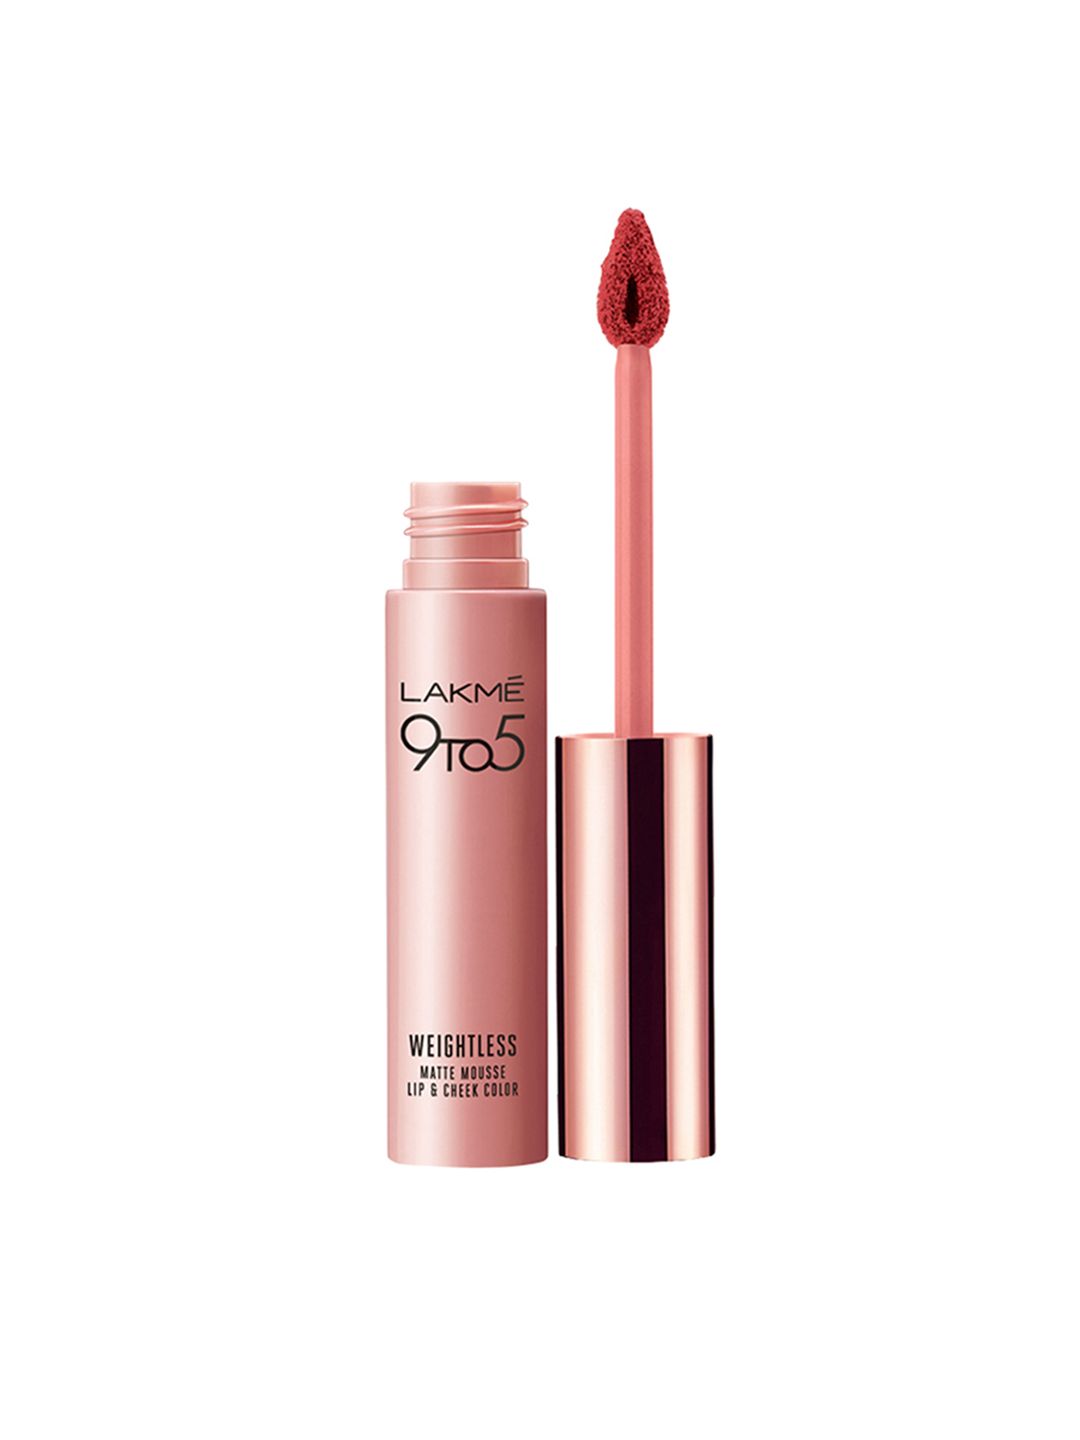 Lakme 9to5 Weightless Matte Mousse Lip & Cheek Color Lipstick Crimson Silk Price in India